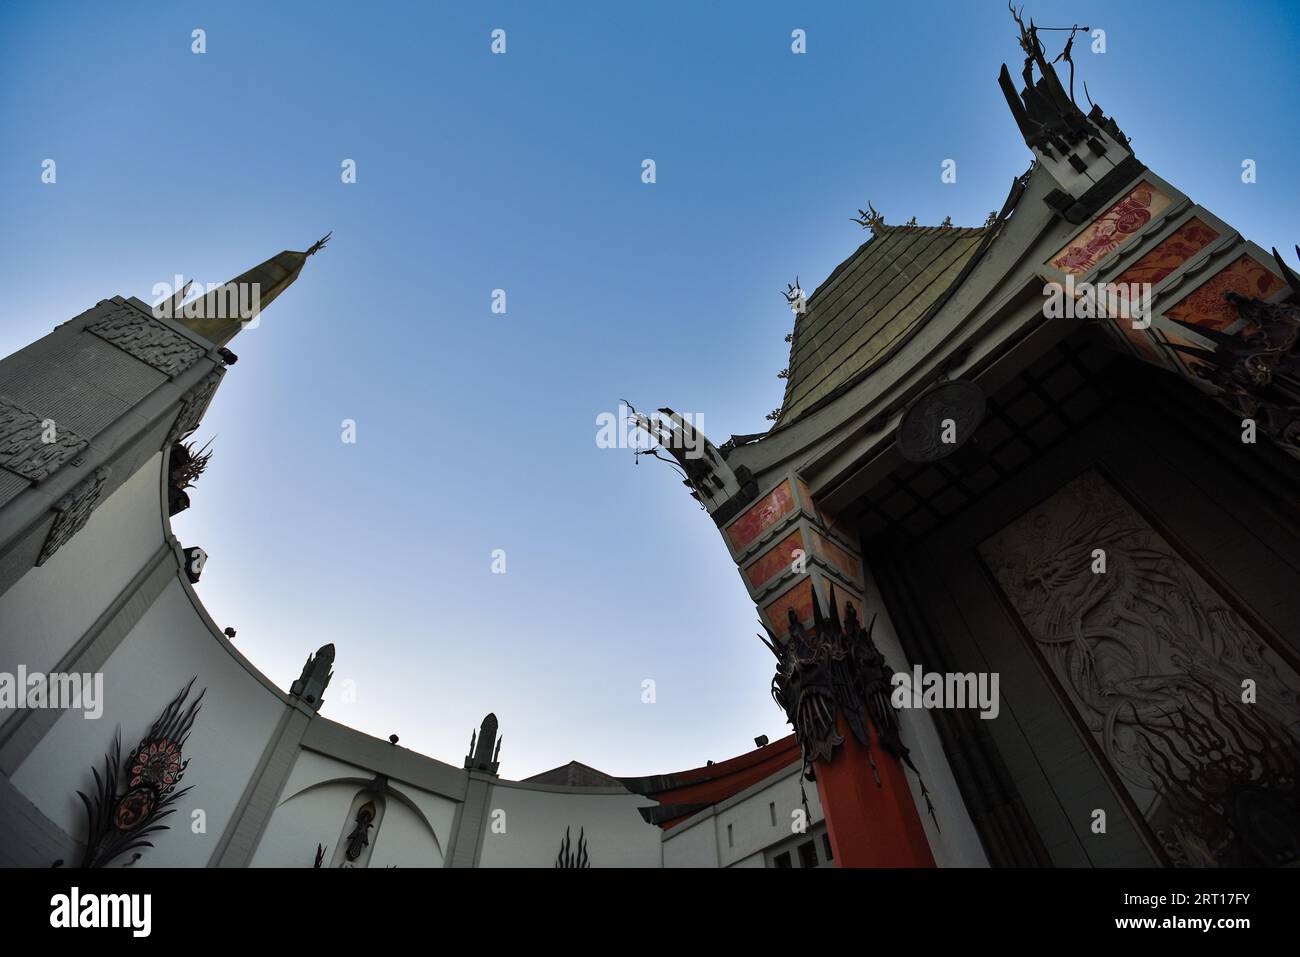 Low Angle View of Grauman's Chinese Theatre at Hollywood Boulevard - Los Angeles, California Stock Photo